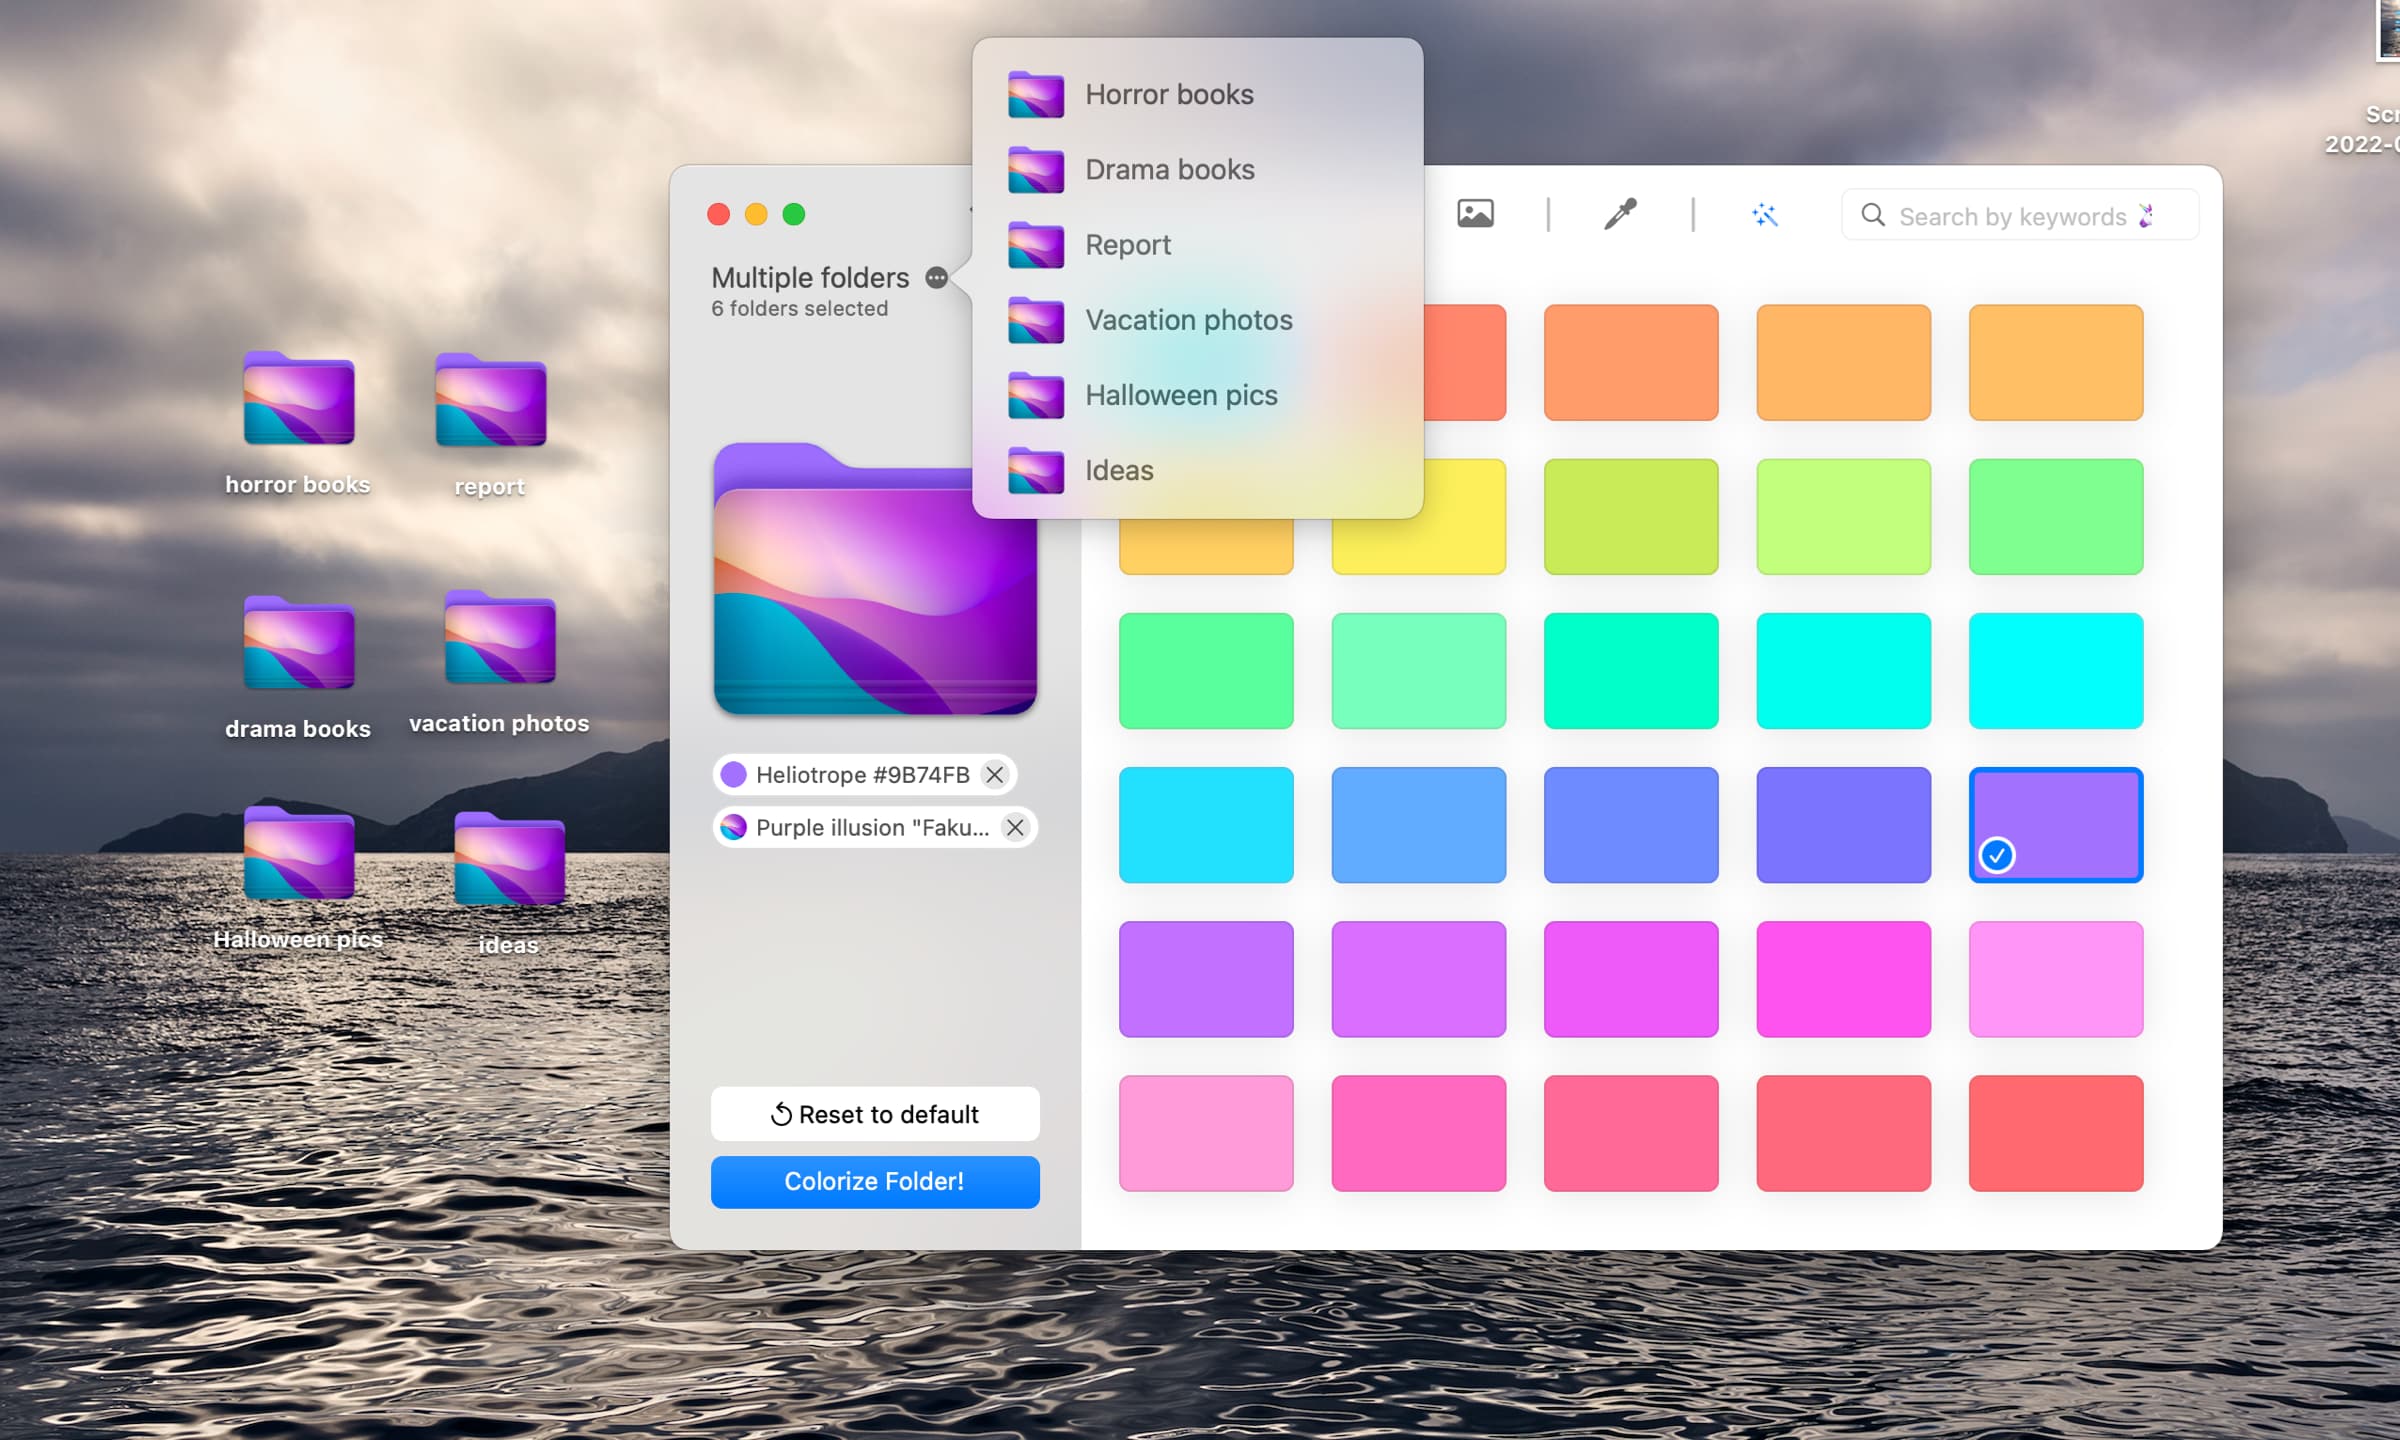 A marketing image from Softorino showcasing customizing multiple folders at once in its Folder Colorizer app for macOS